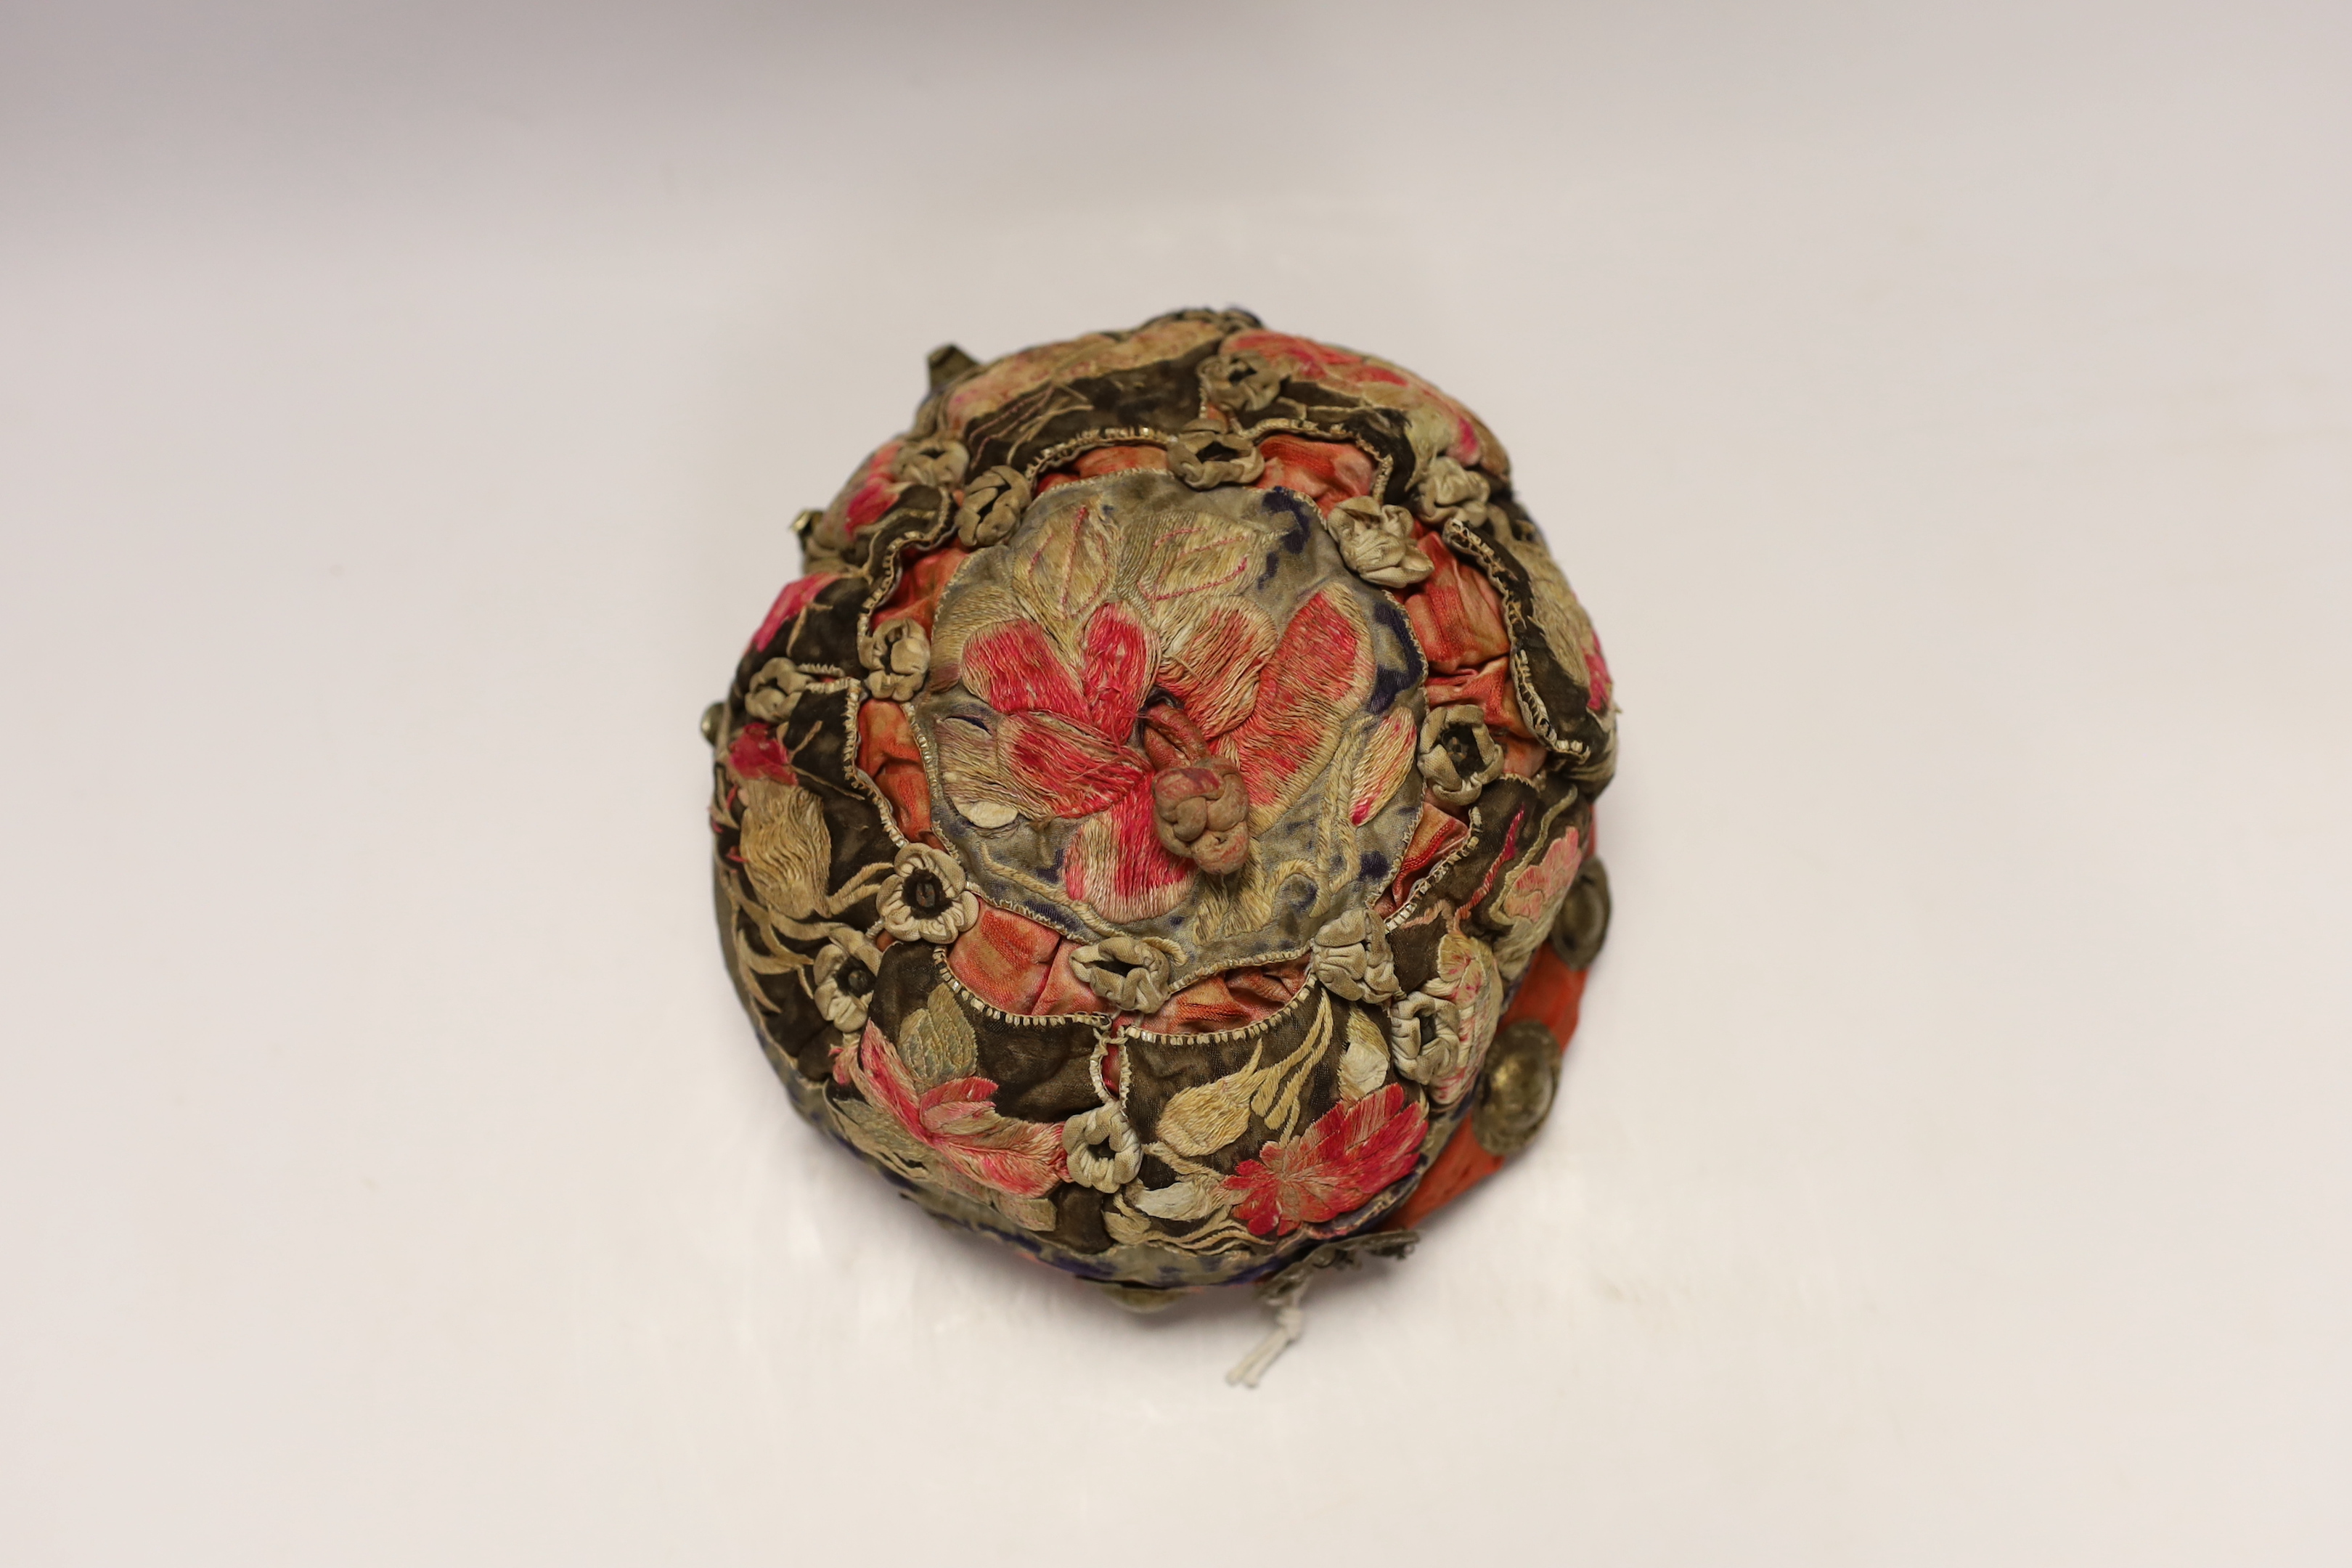 A Chinese metal mounted and embroidered skull cap